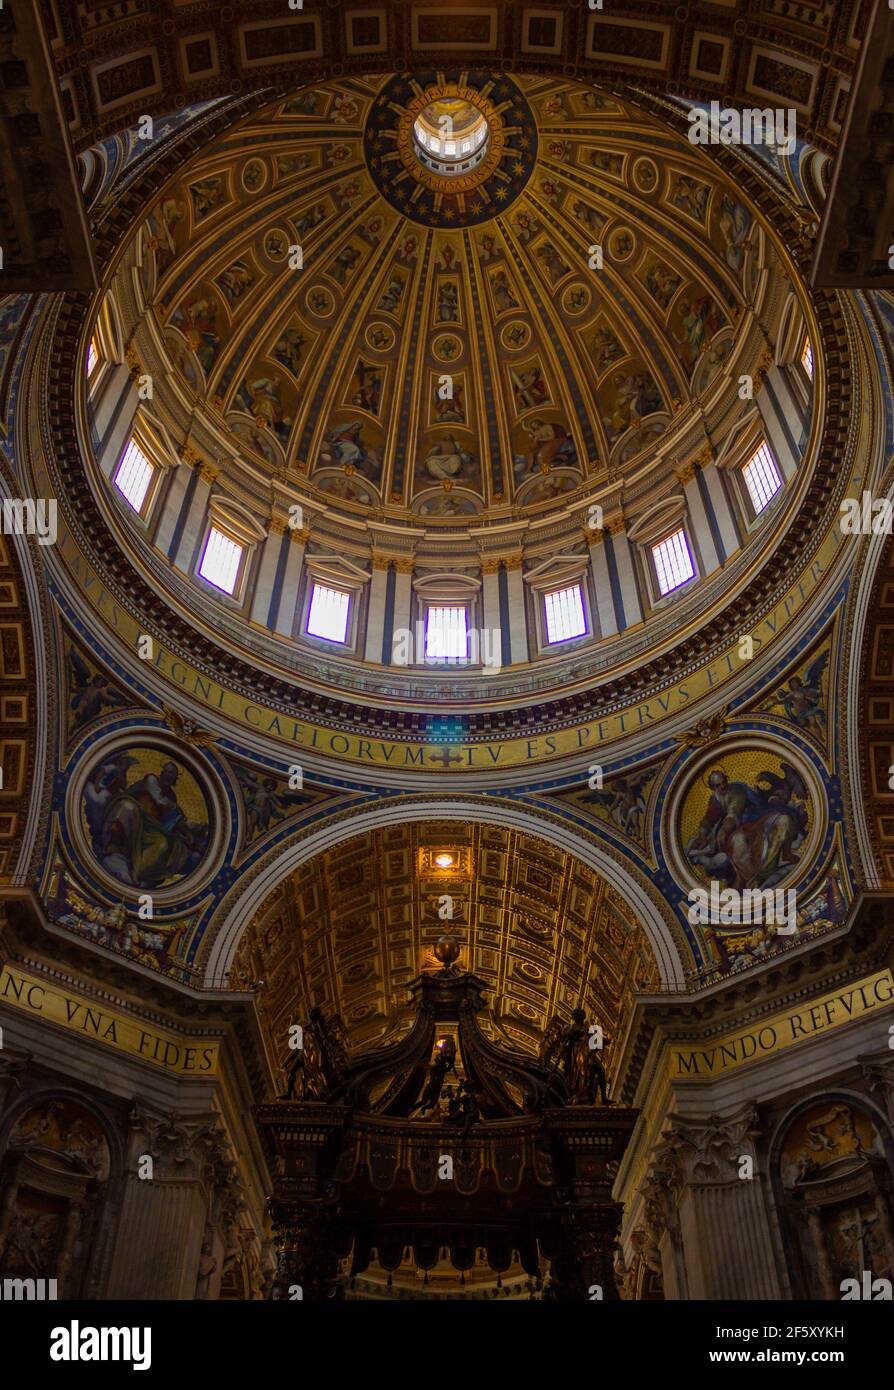 A picture of the interior of the St. Peter's Basilica and its iconic dome. Stock Photo